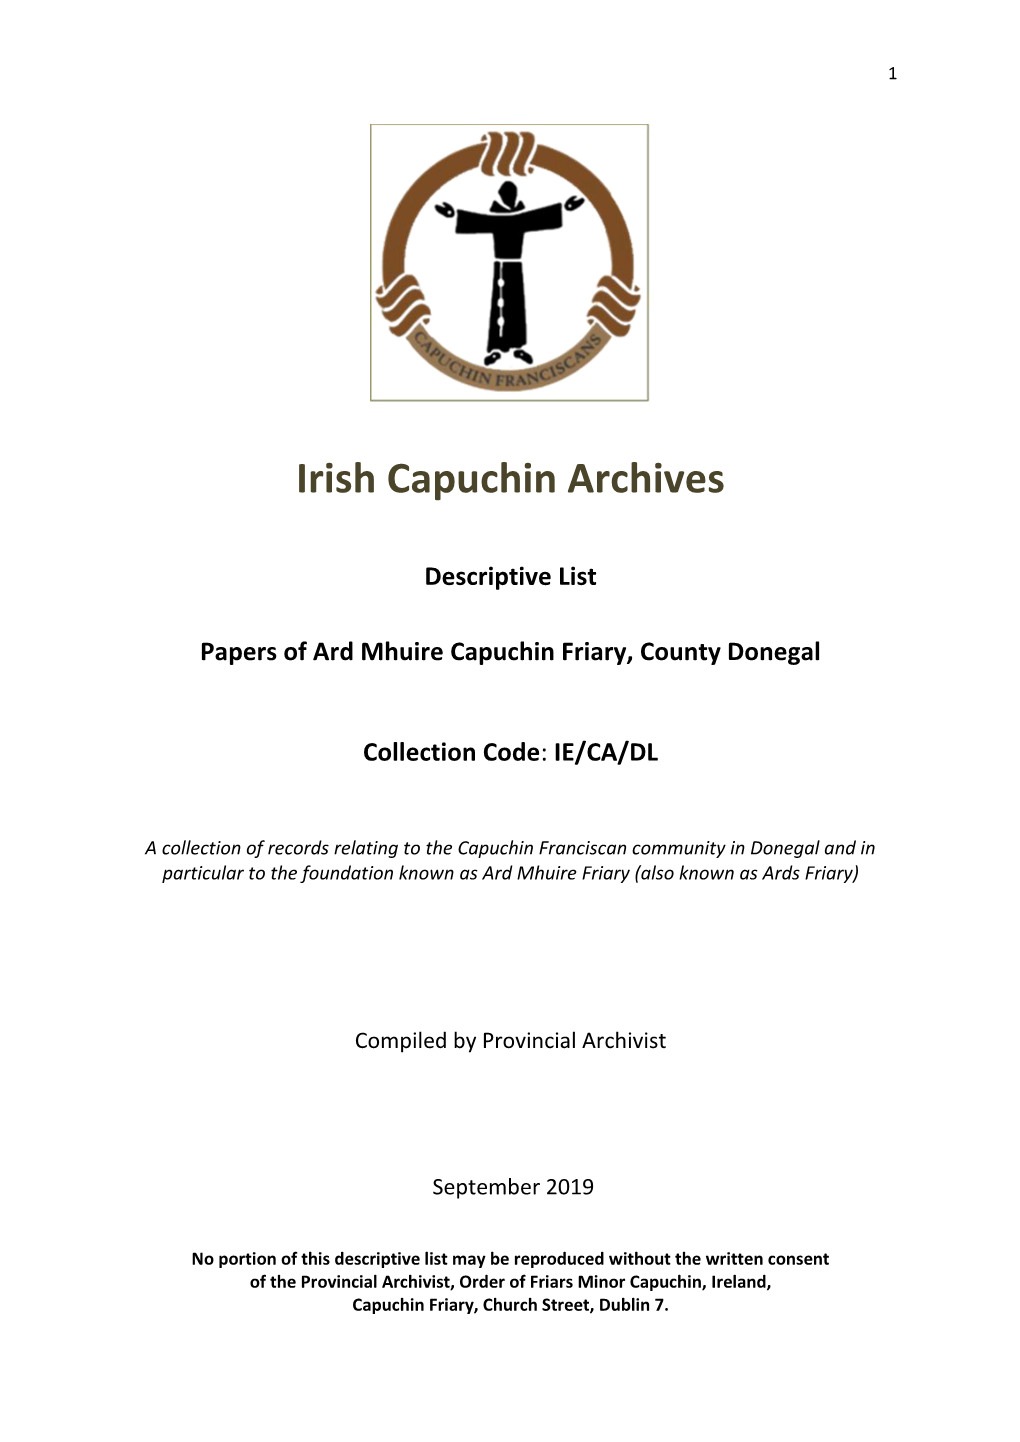 12. Papers of Ard Mhuire Capuchin Friary